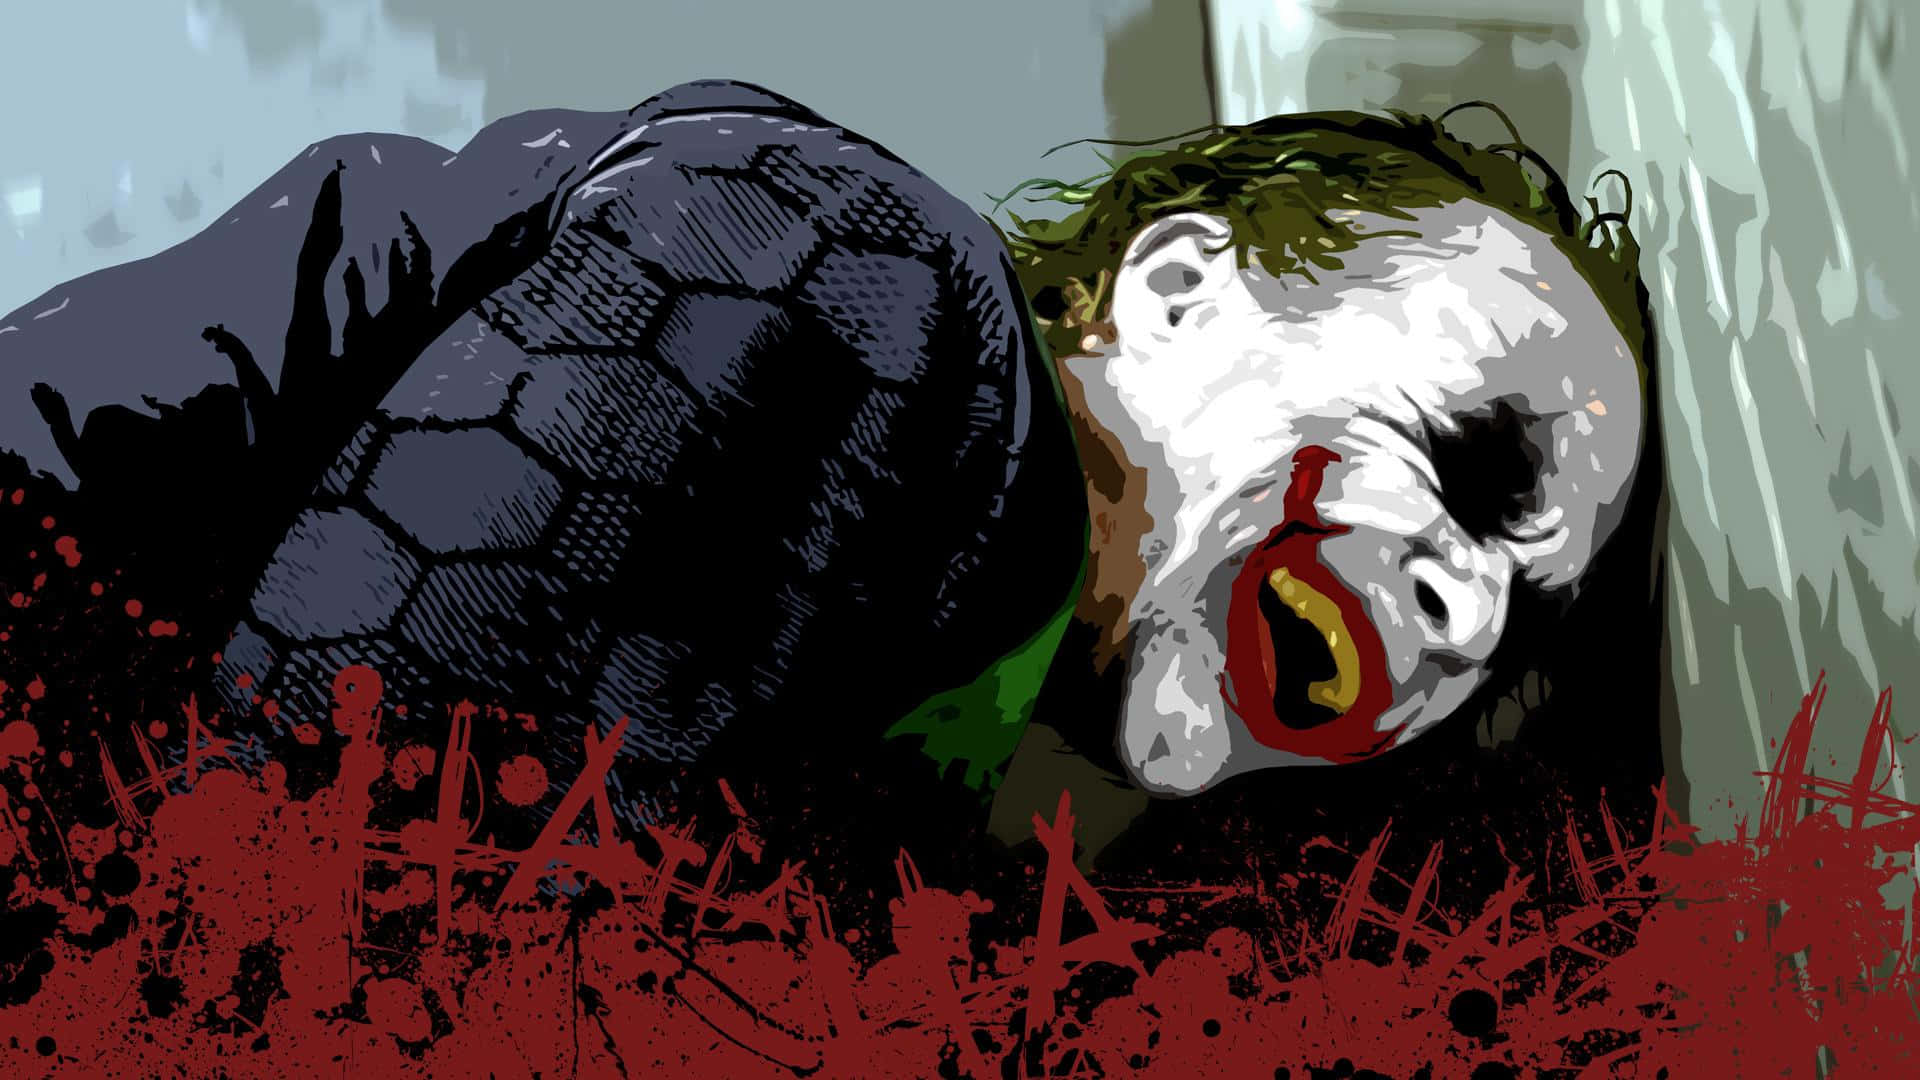 Maniacal Joker Laughing in a Gripping Portrait Wallpaper